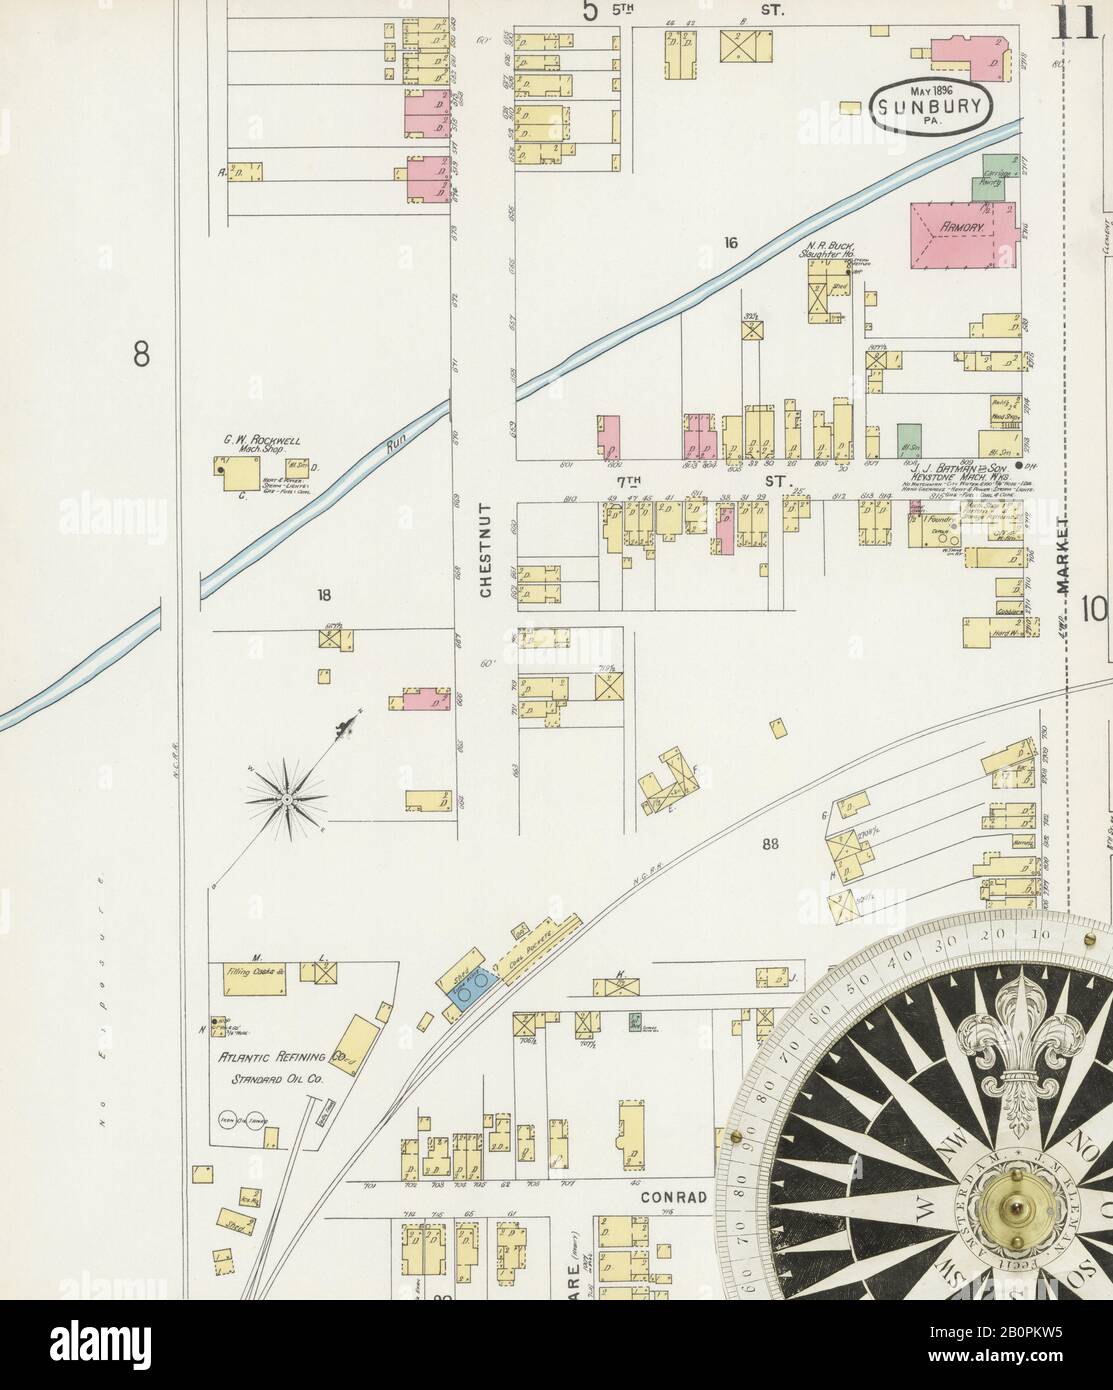 Image 11 of Sanborn Fire Insurance Map from Sunbury, Northumberland County, Pennsylvania. May 1896. 11 Sheet(s), America, street map with a Nineteenth Century compass Stock Photo